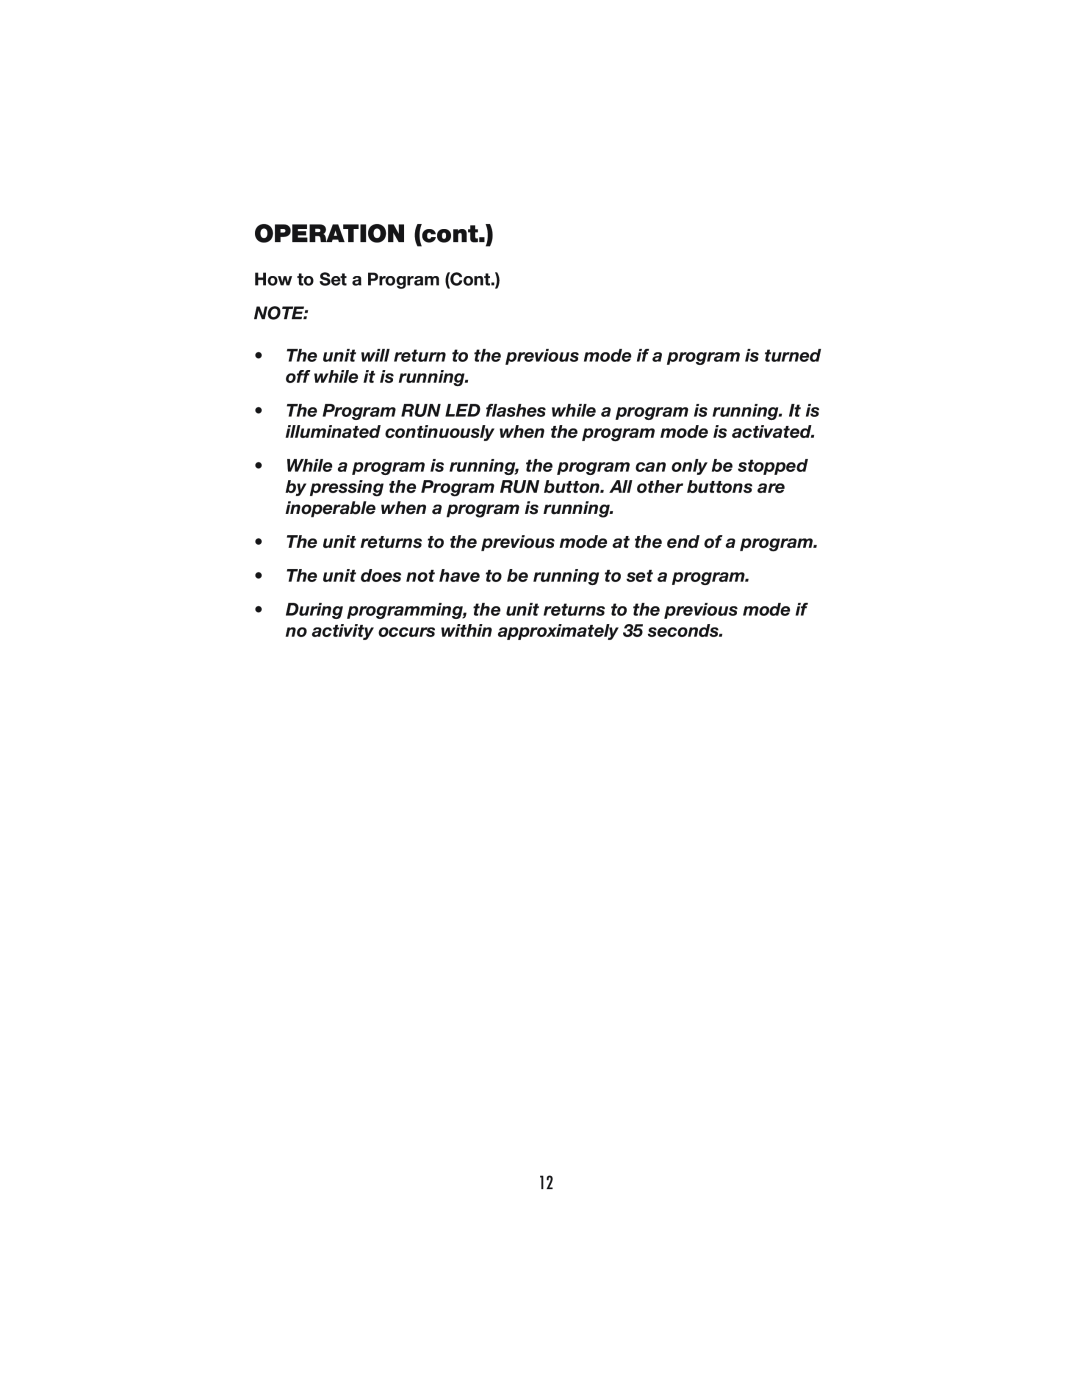 Denso PRO 18 operation manual How to Set a Program Cont, OPERATION cont 